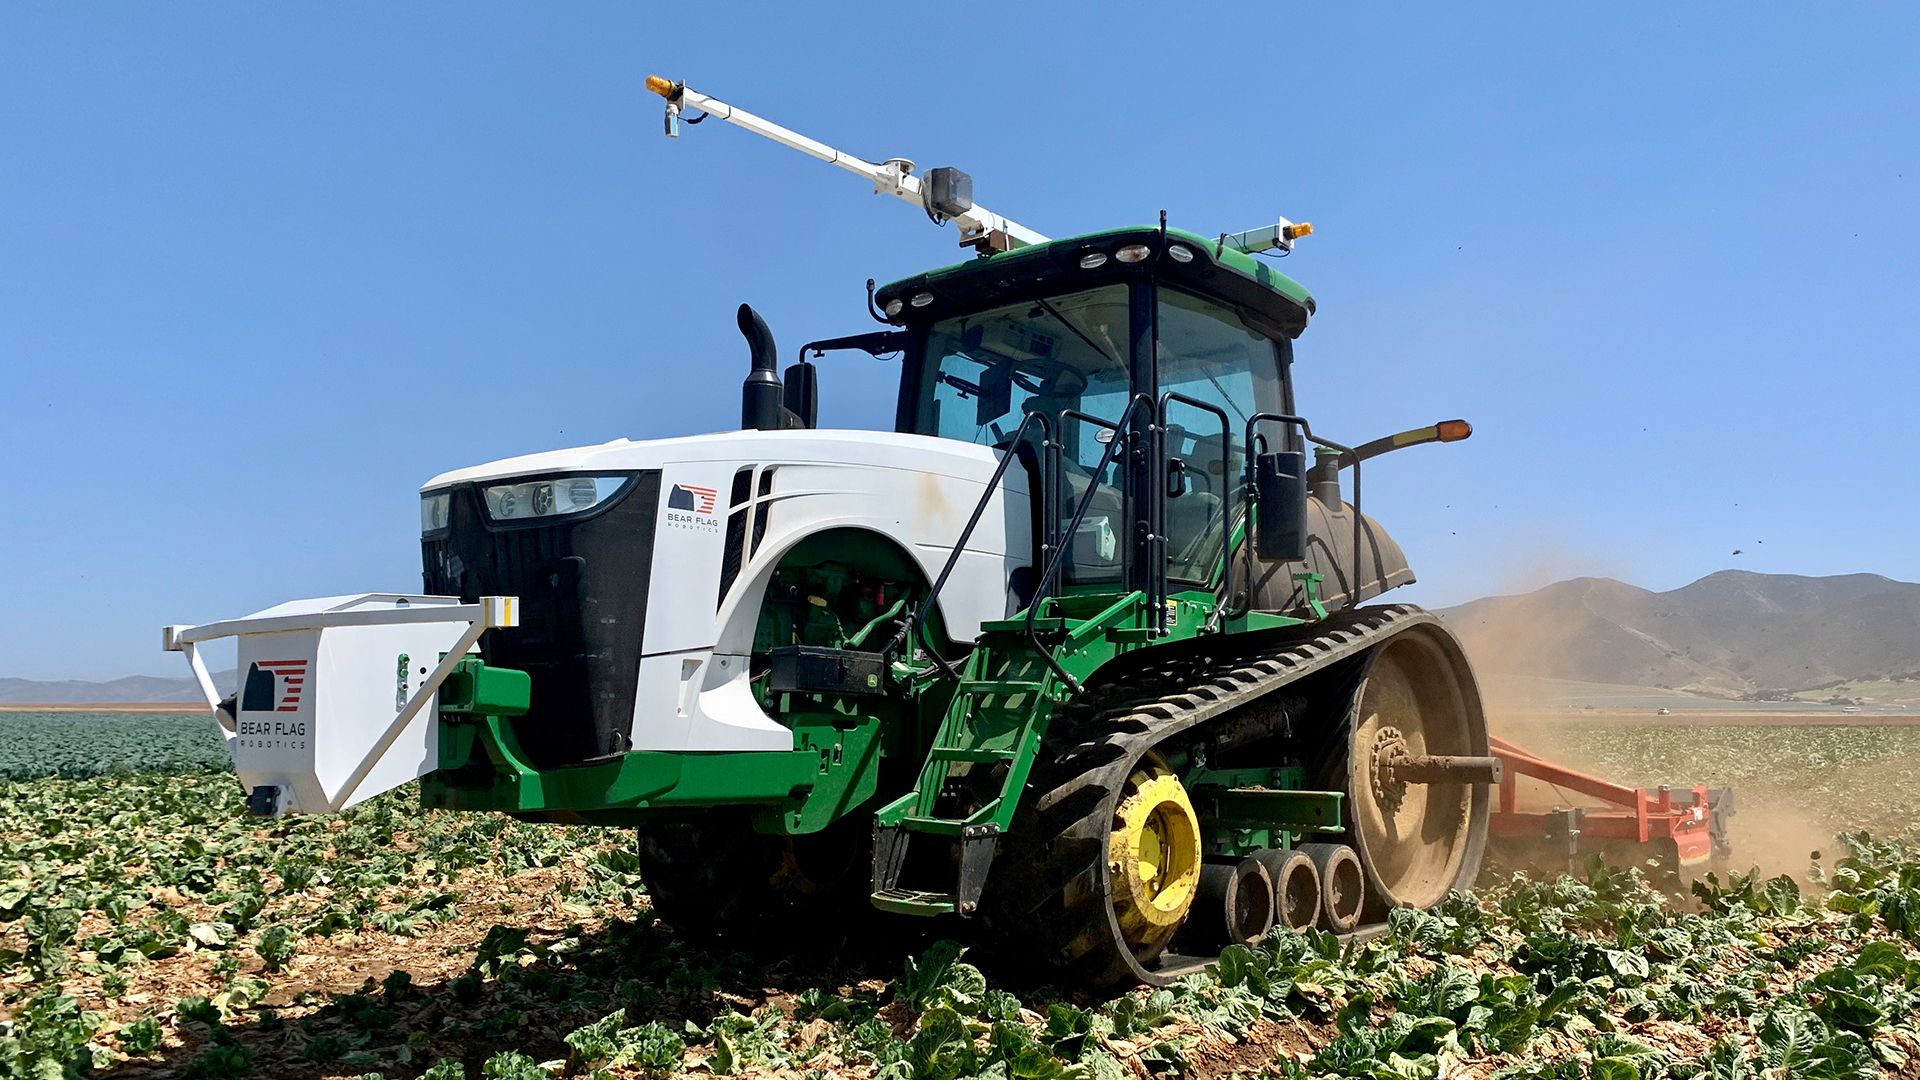 Image of a driverless John Deere tractor in operation